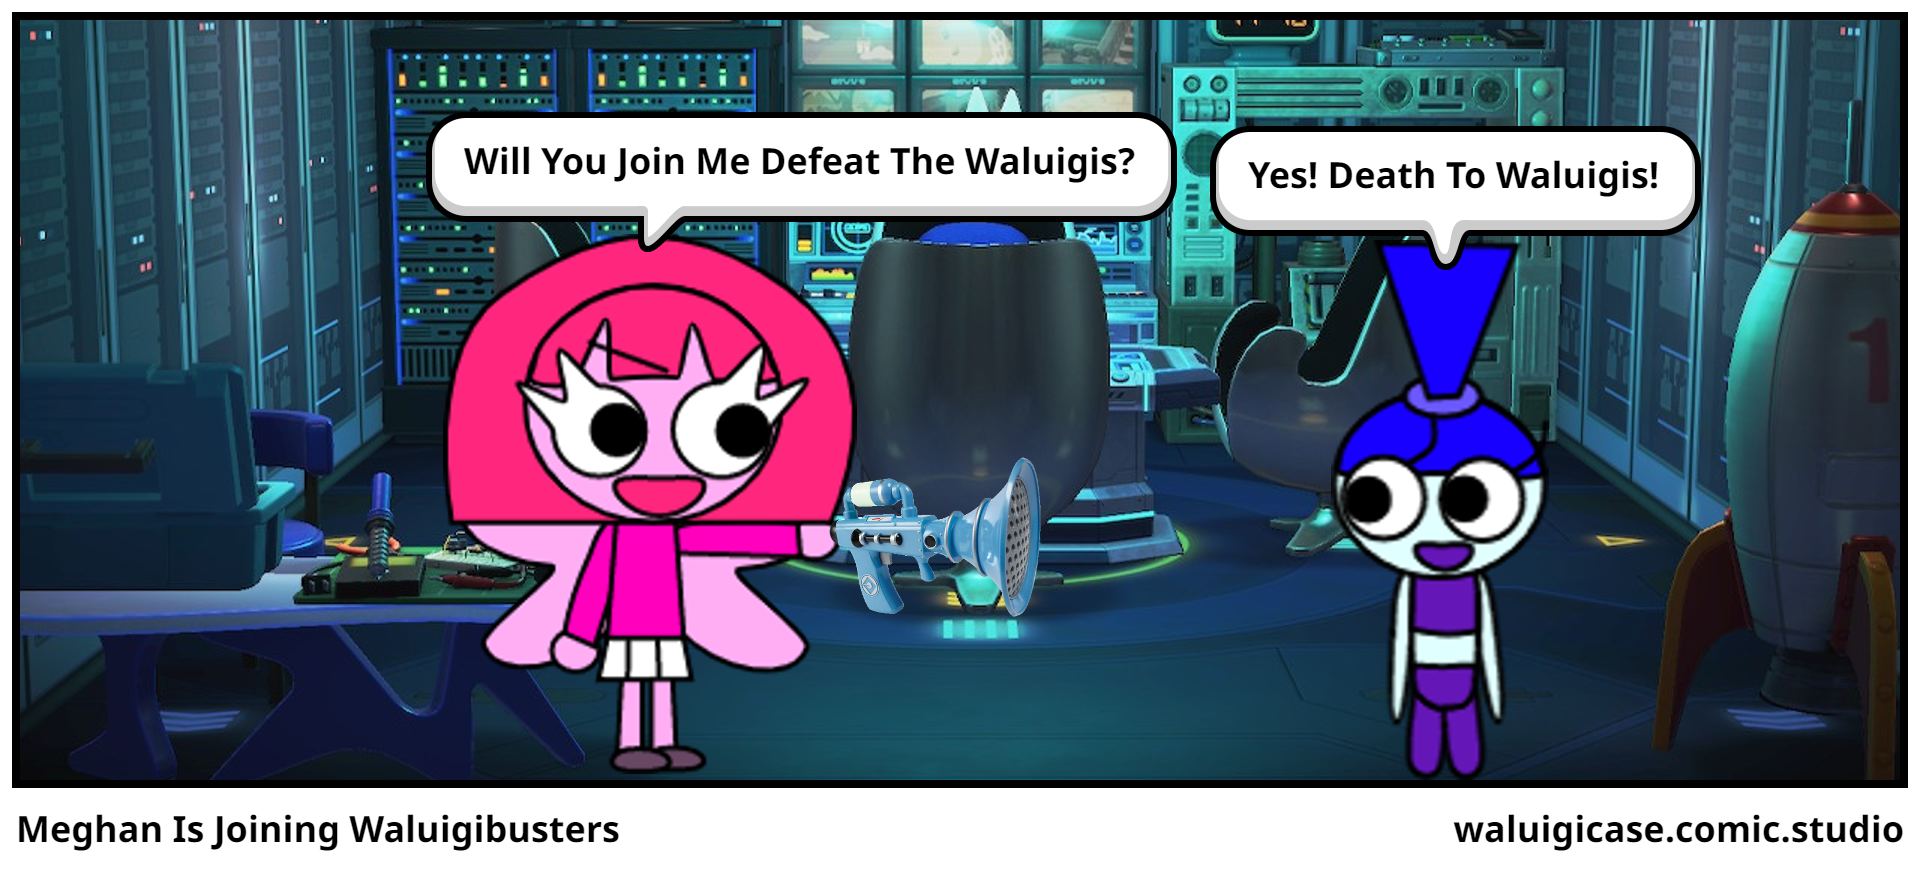 Meghan Is Joining Waluigibusters